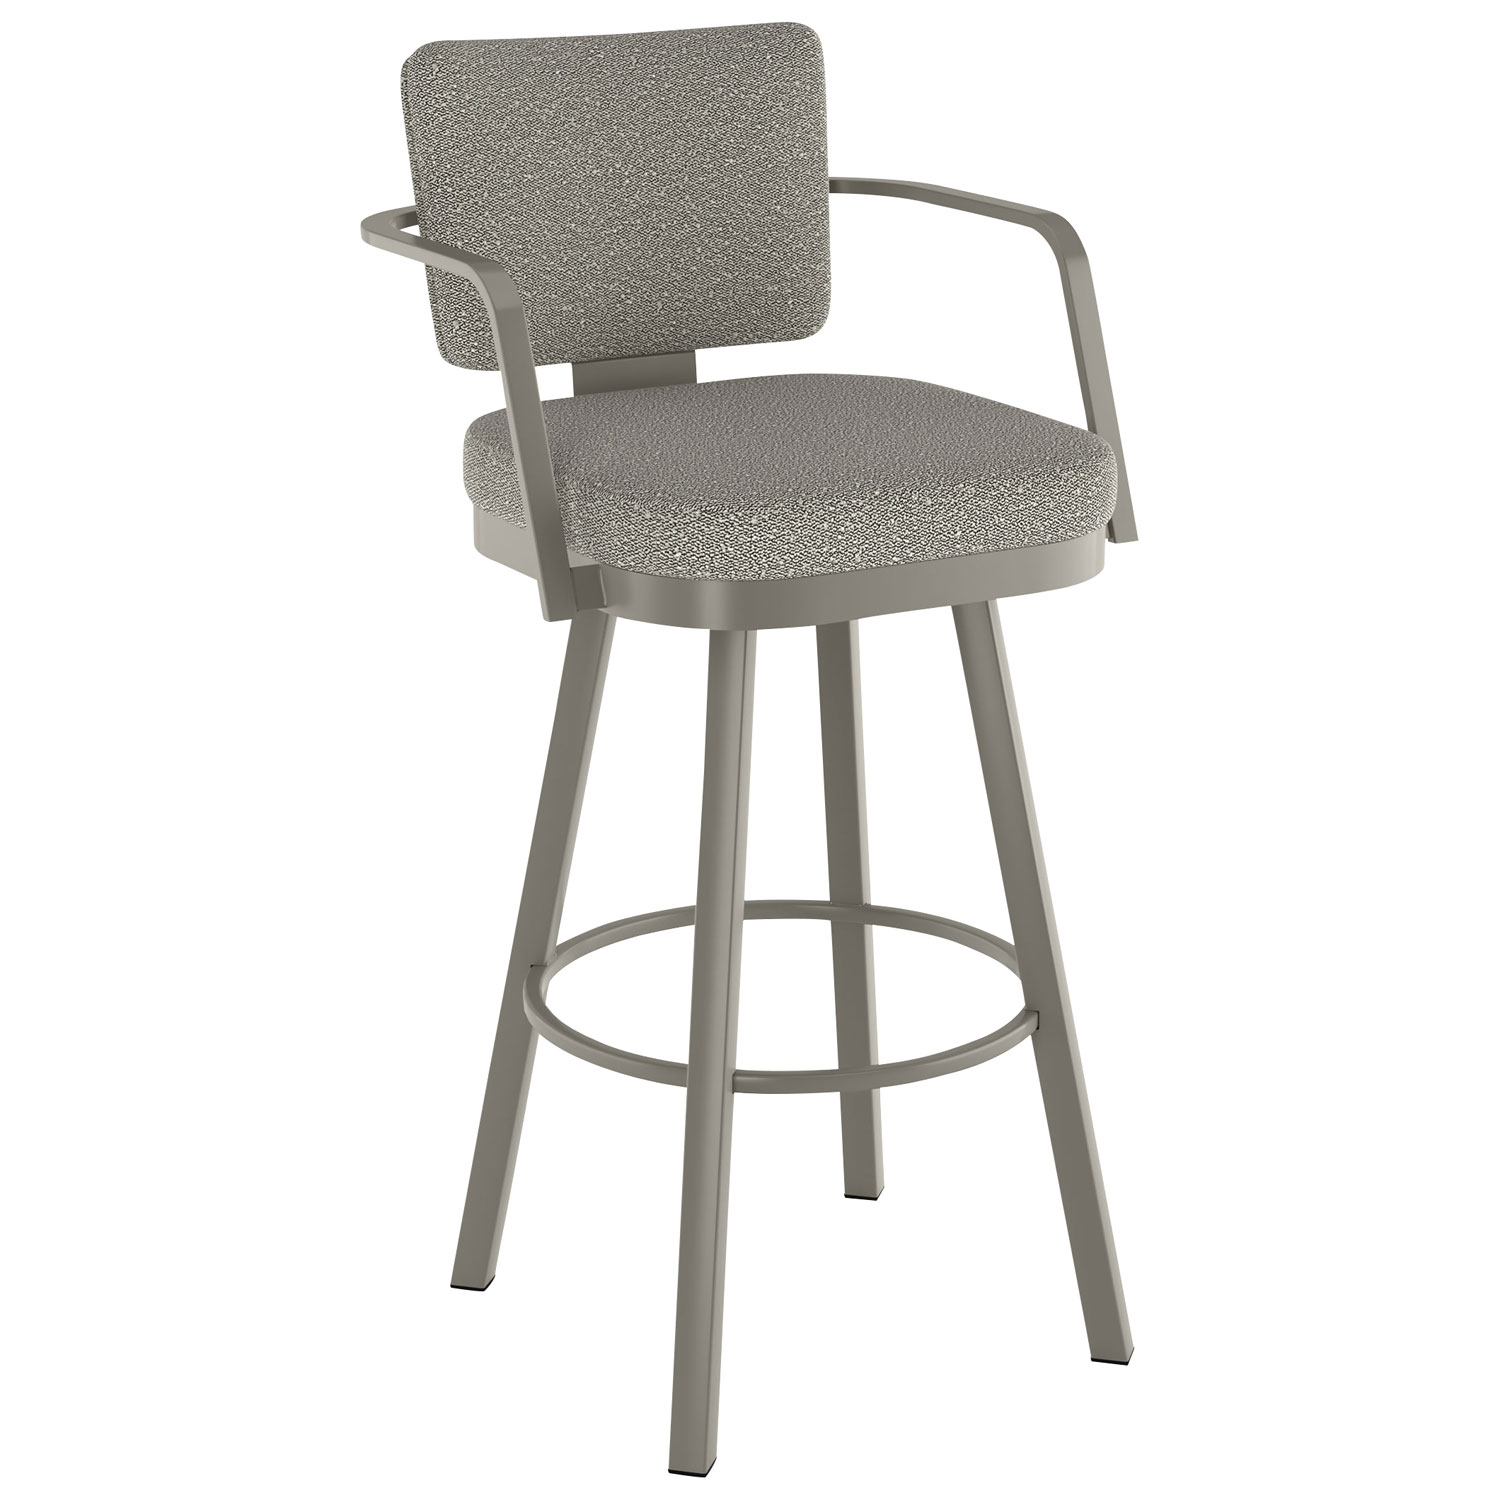 Thea Rustic Country Counter Height Barstool - Beige Grey Boucle/Grey